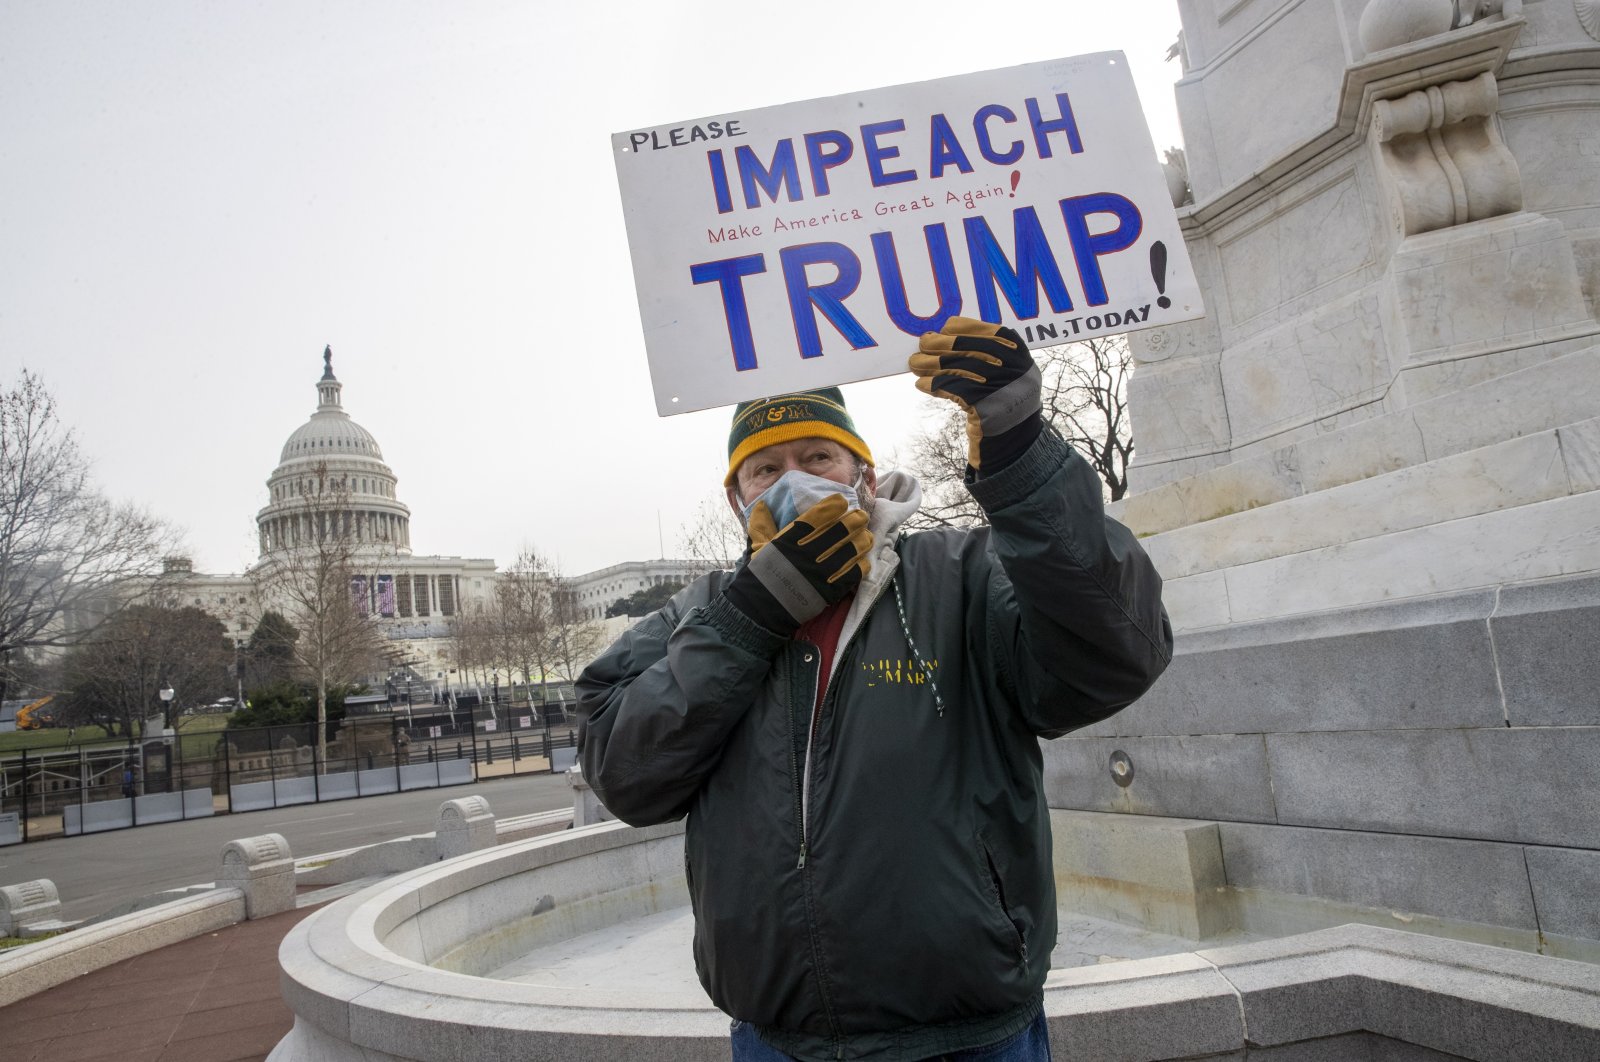 A protester holds a sign that reads "Impeach Trump" near the West Front of the U.S. Capitol in Washington, D.C., Jan. 11, 2021. (EPA Photo)